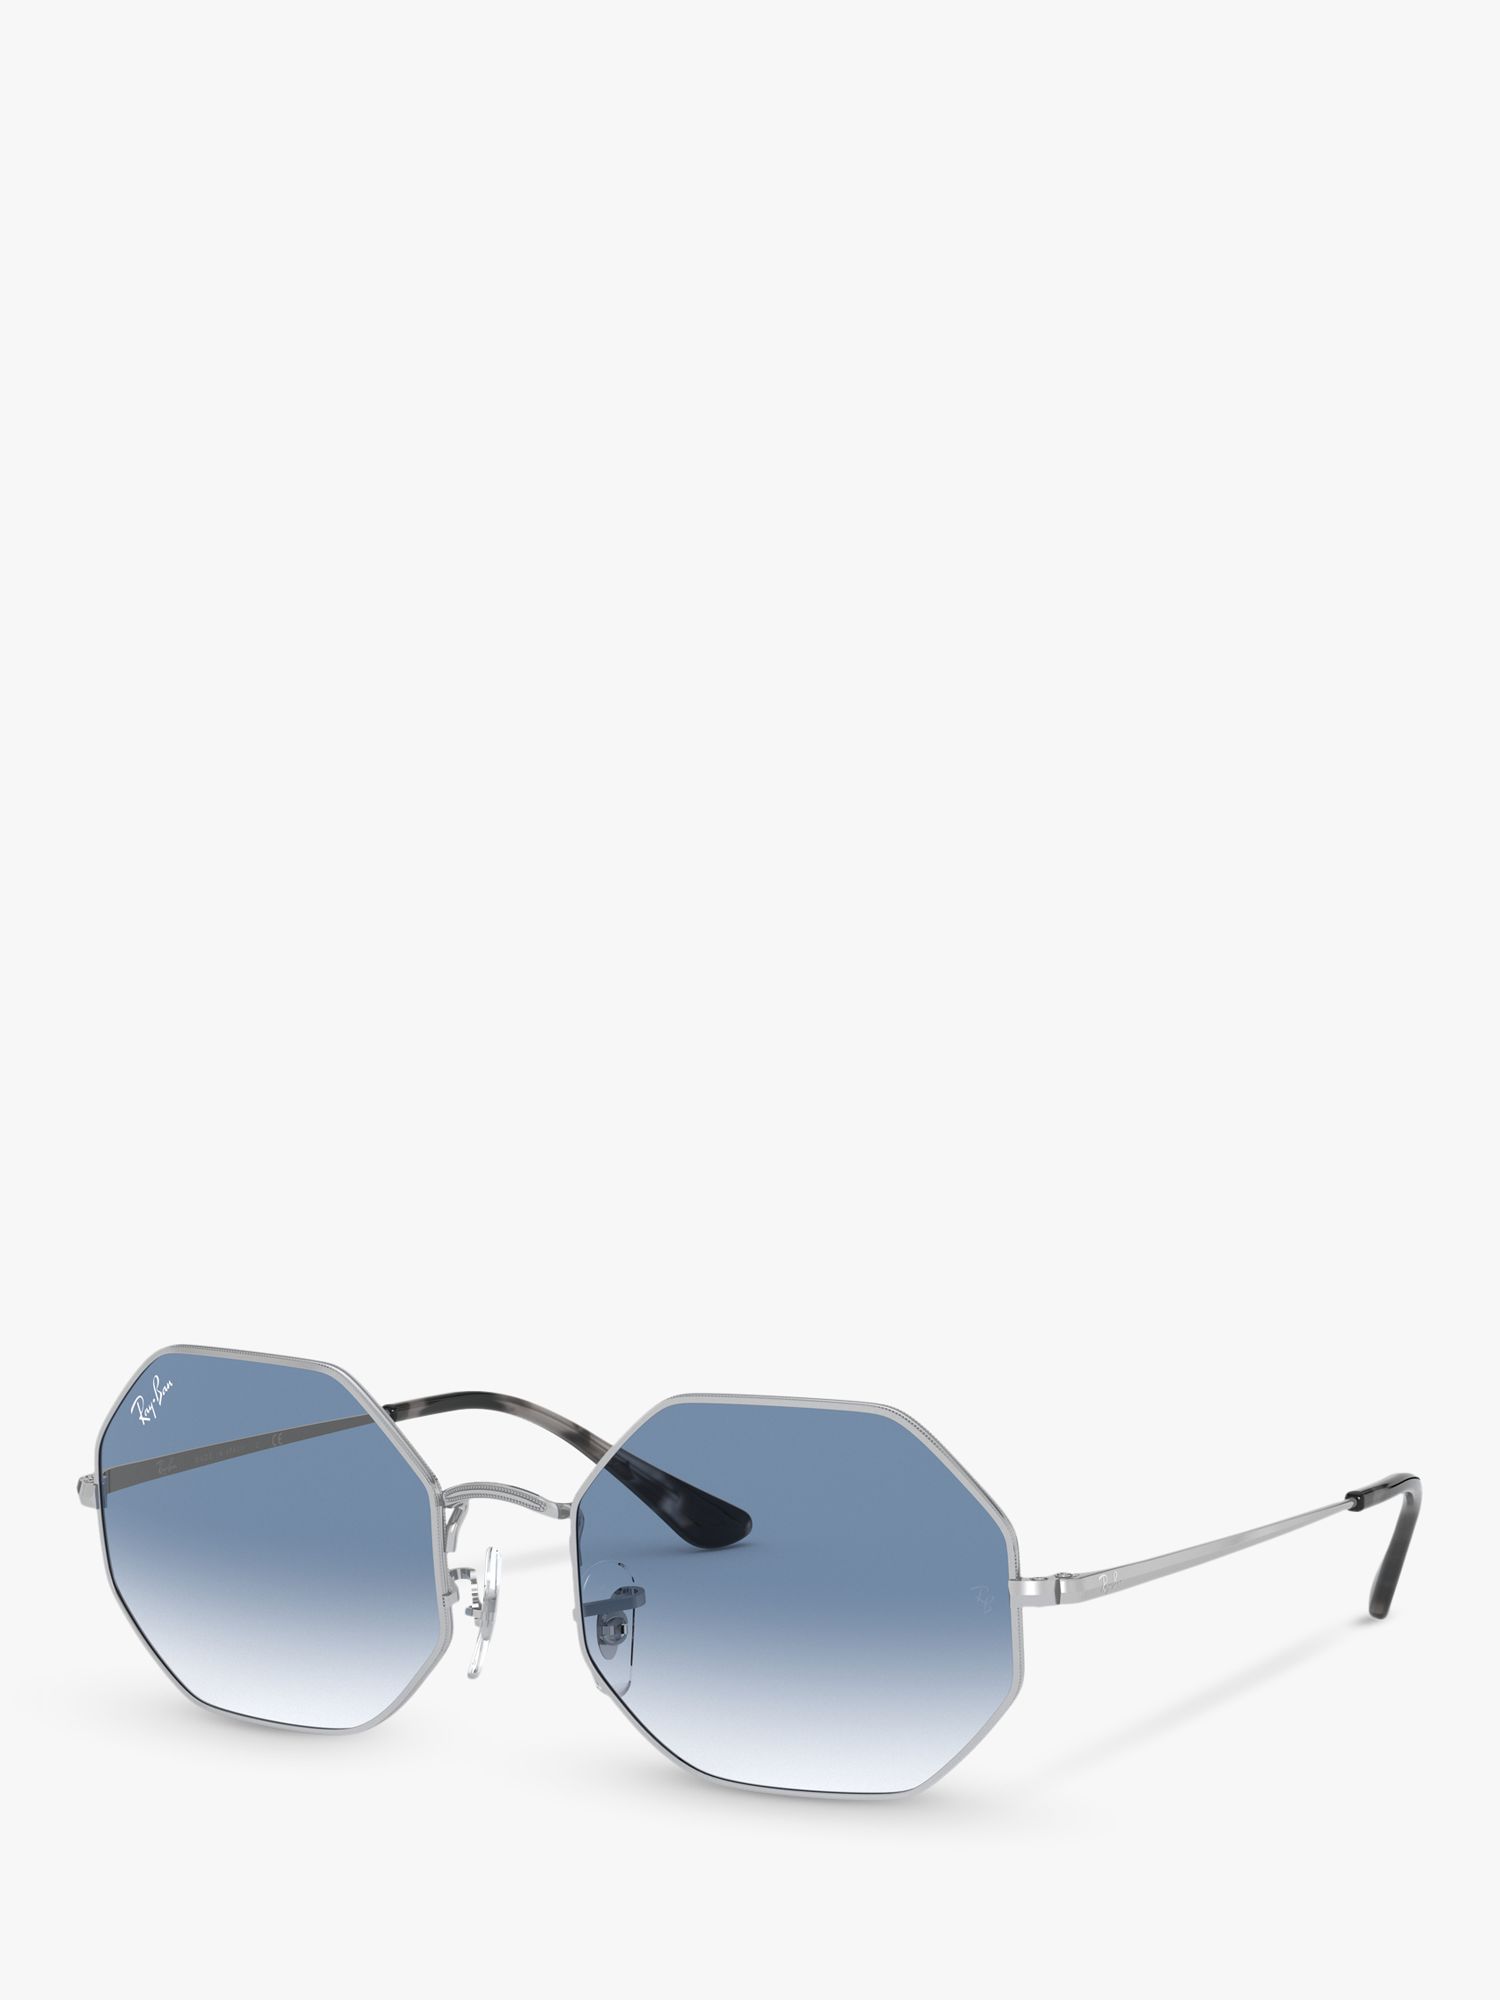 Ray-Ban RB1972 Unisex Octagonal Sunglasses, Silver/Blue Gradient at ...